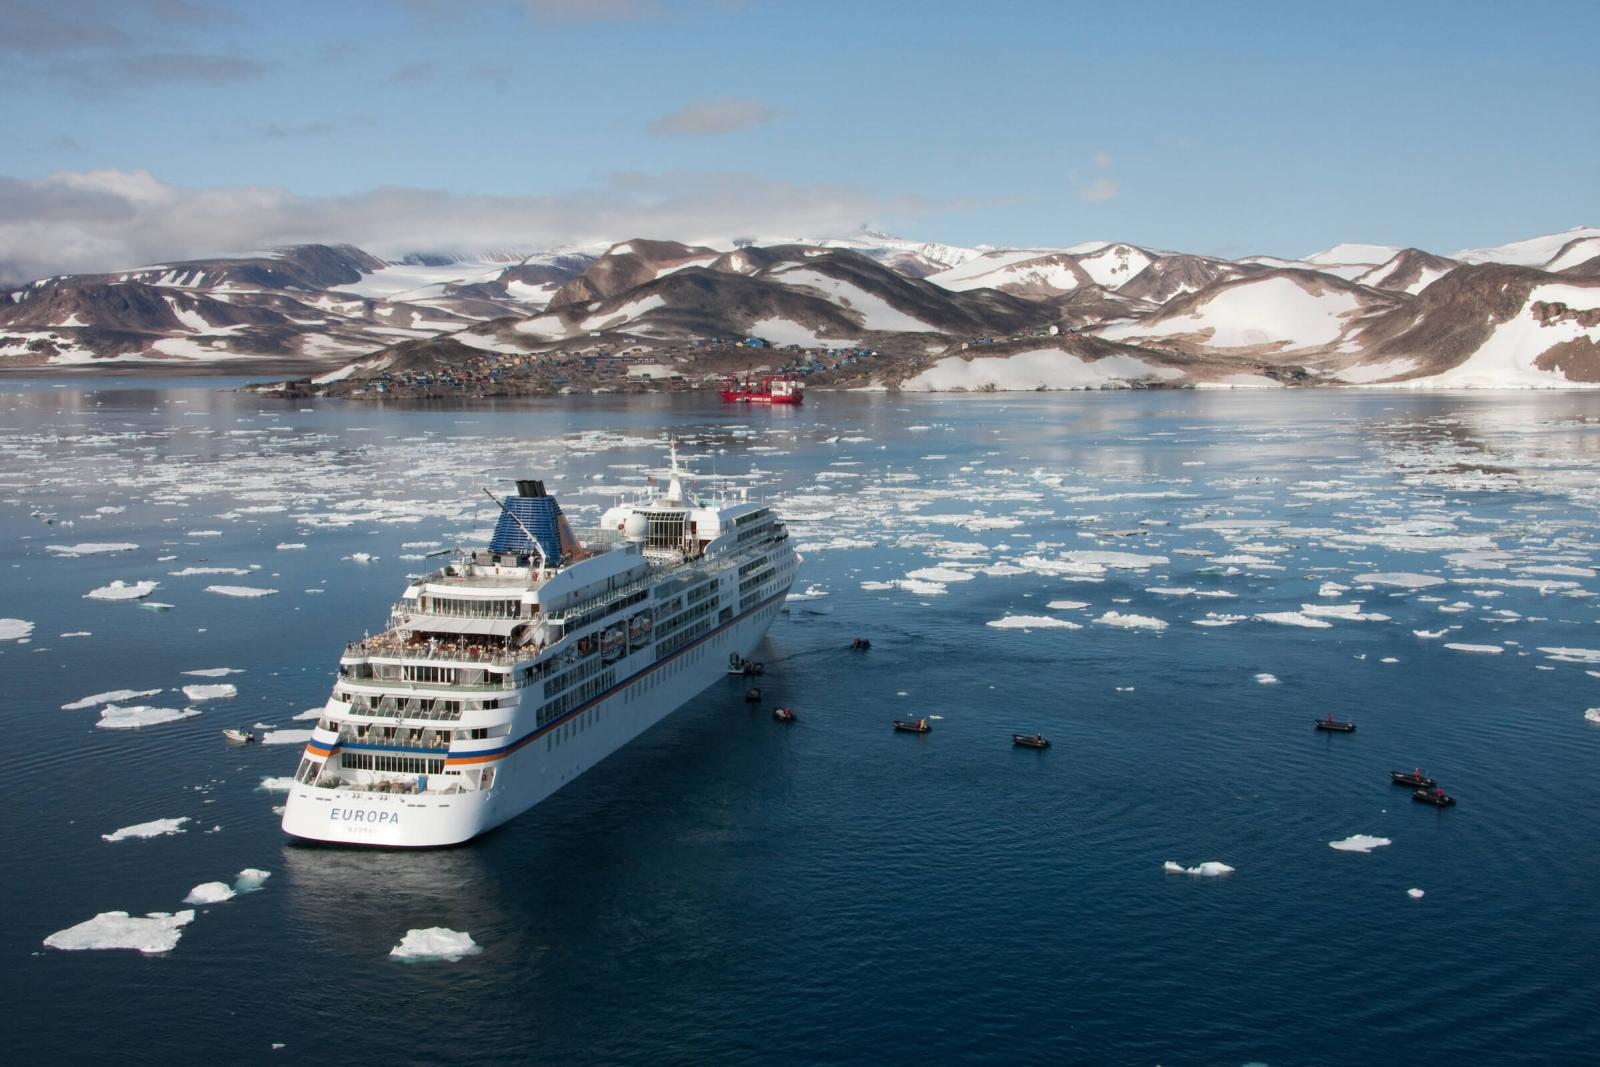 The cruise ship Europa anchored outside Ittoqqortoormiit in East Greenland. By Frank Petersen - Visit Greenland